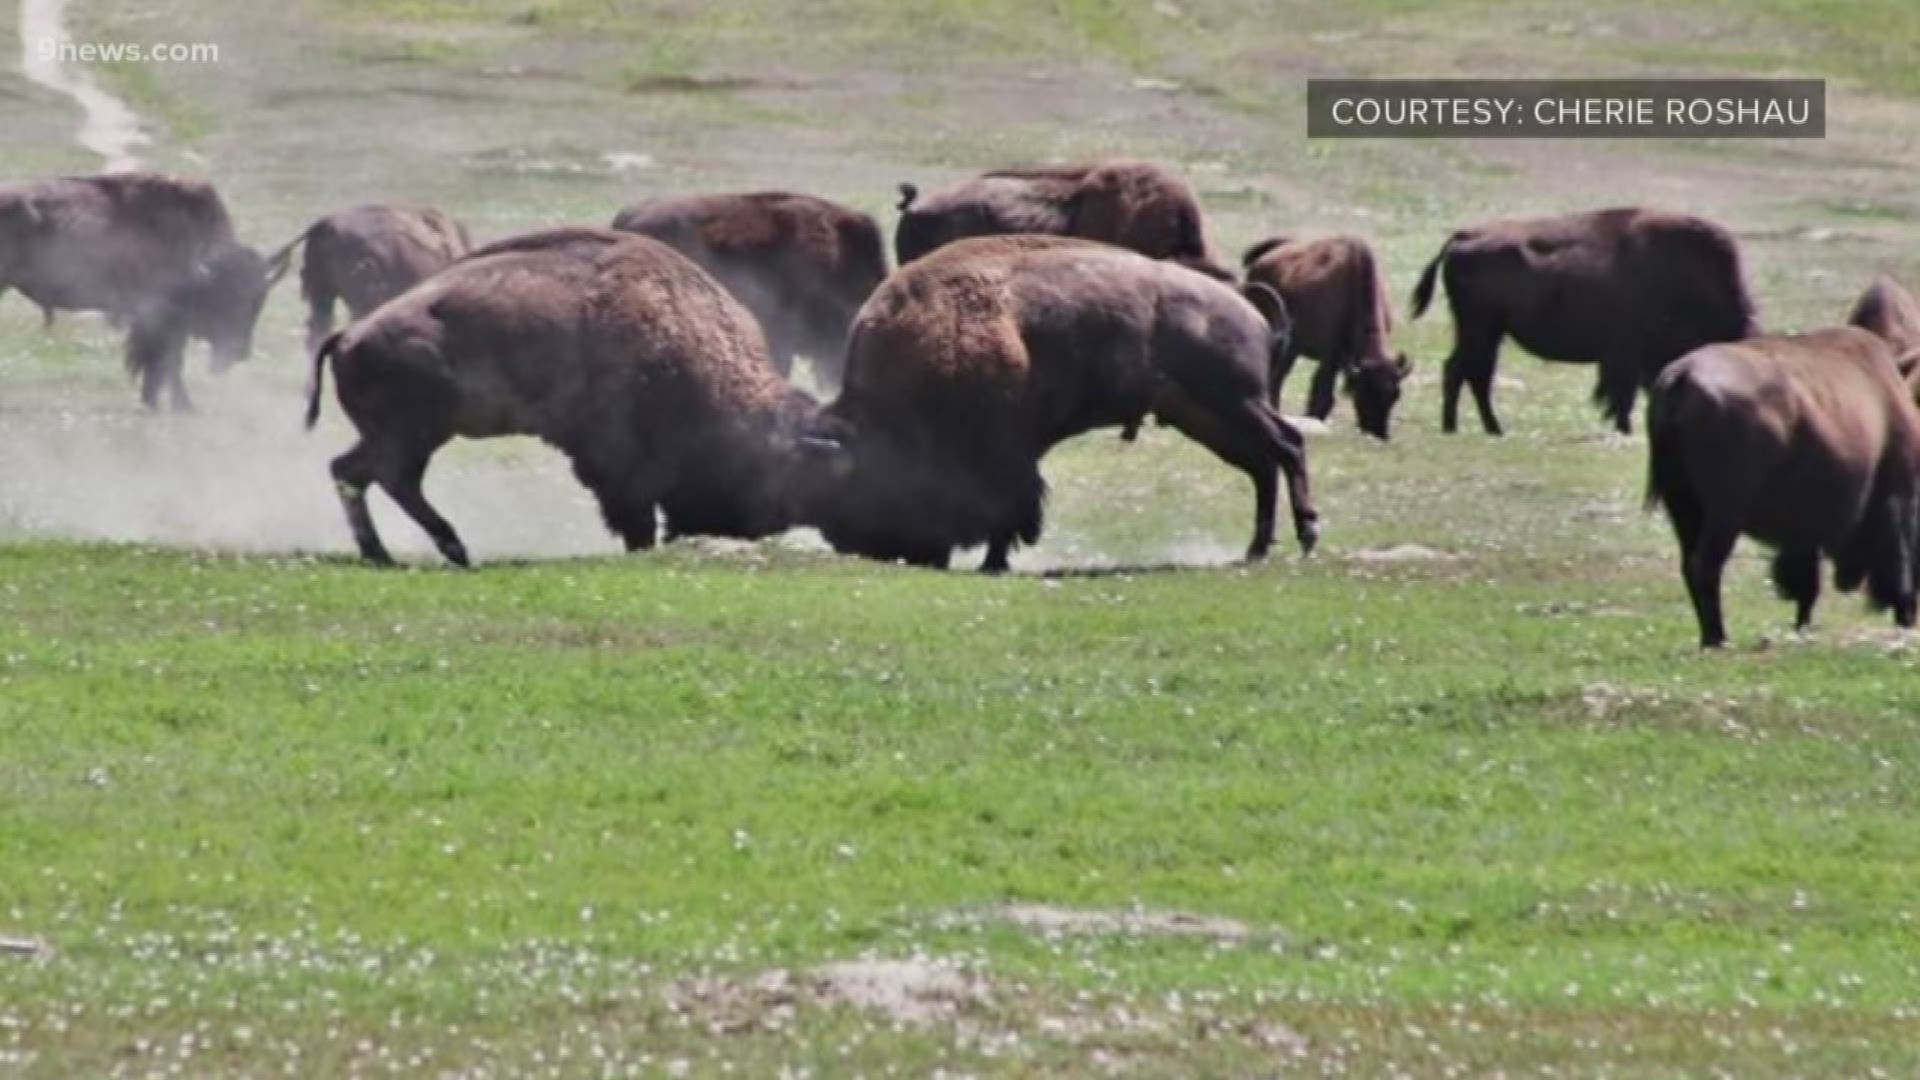 The 17-year-old girl was on a trail over the weekend when she walked between bull bison that had been fighting, park officials said.